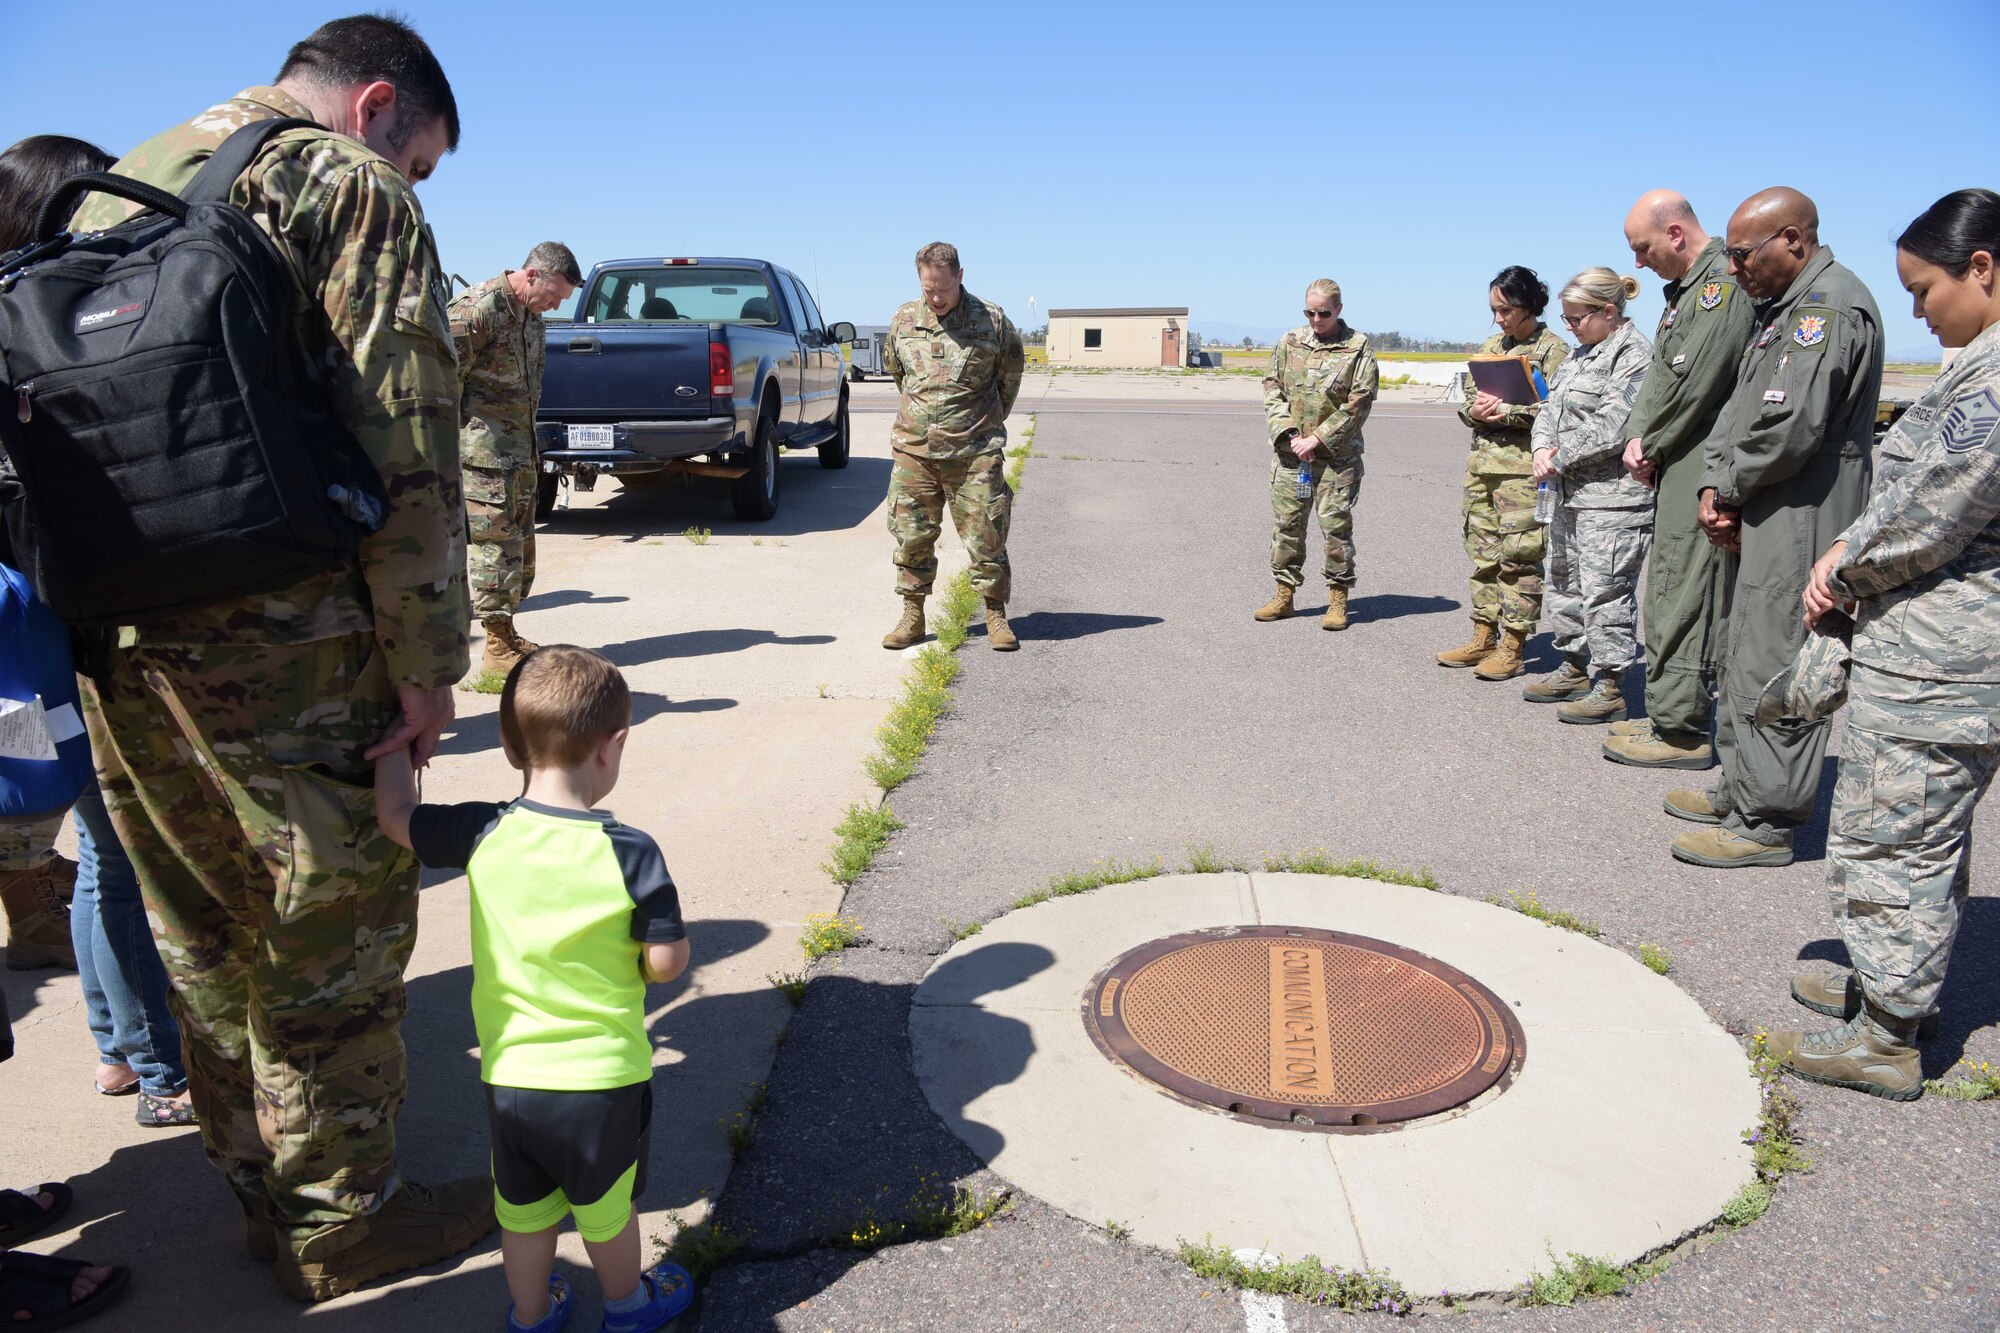 Maj. David Kreis, 944th Fighter Wing chaplain, prays for mobilized Air Force Reserve medics before they board their airlift in support of the COVID-19 pandemic at Luke Air Force Base, Ariz., April 5, 2020. This deployment is part of a larger mobilization package of more than 120 doctors, nurses, and respiratory technicians. Air Force Reserve units across the nation provided over the past 48 hours in support of the COVID-19 response to take care of Americans.